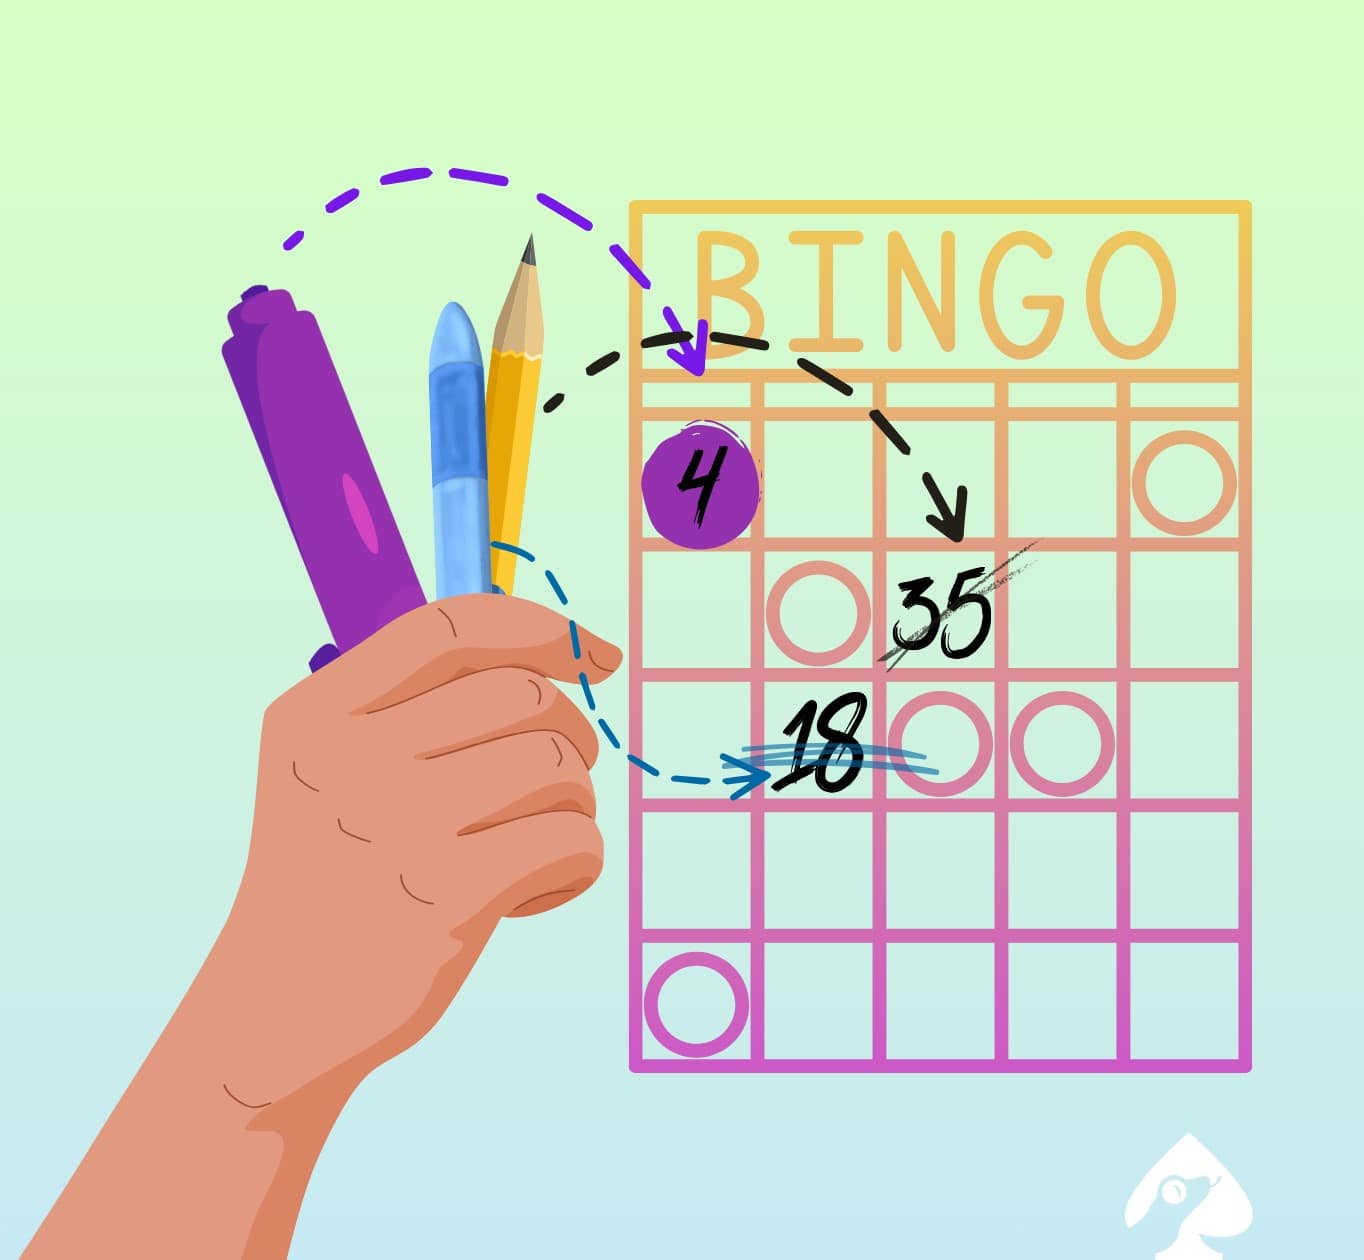 Ways to mark your matches in bingo